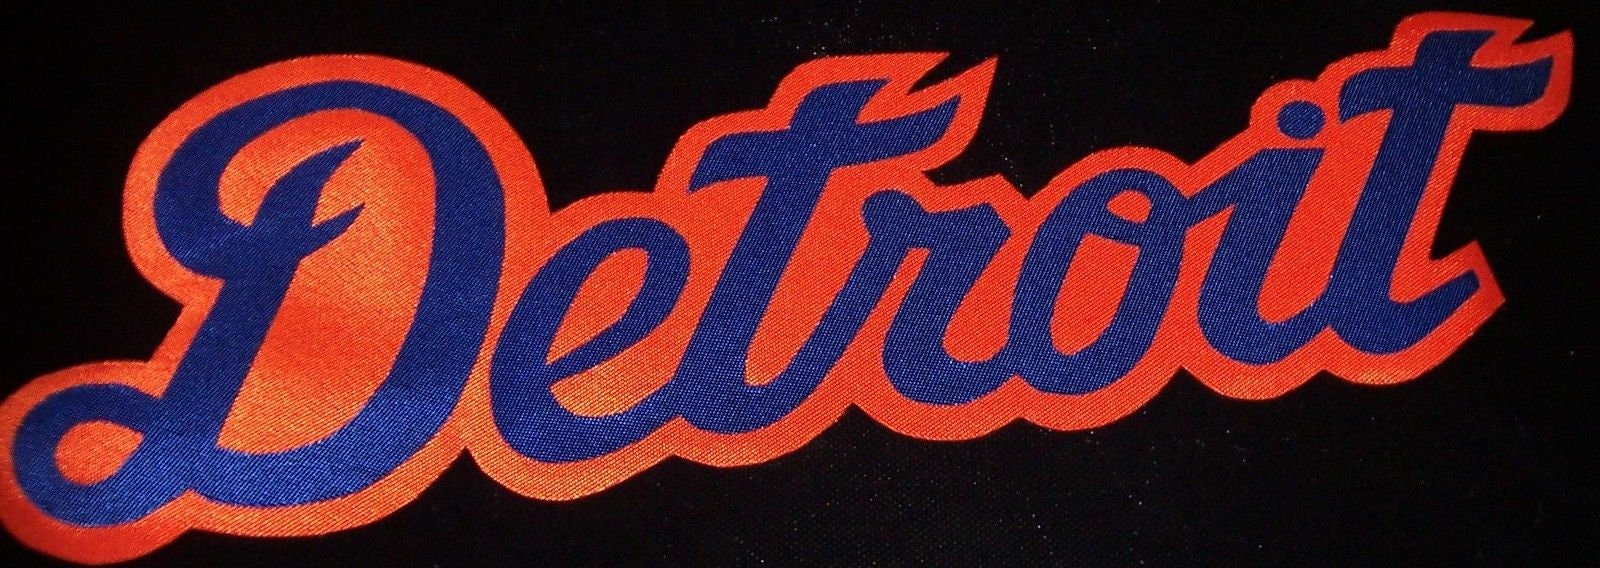 Huge Detroit Tigers Iron on Patch 